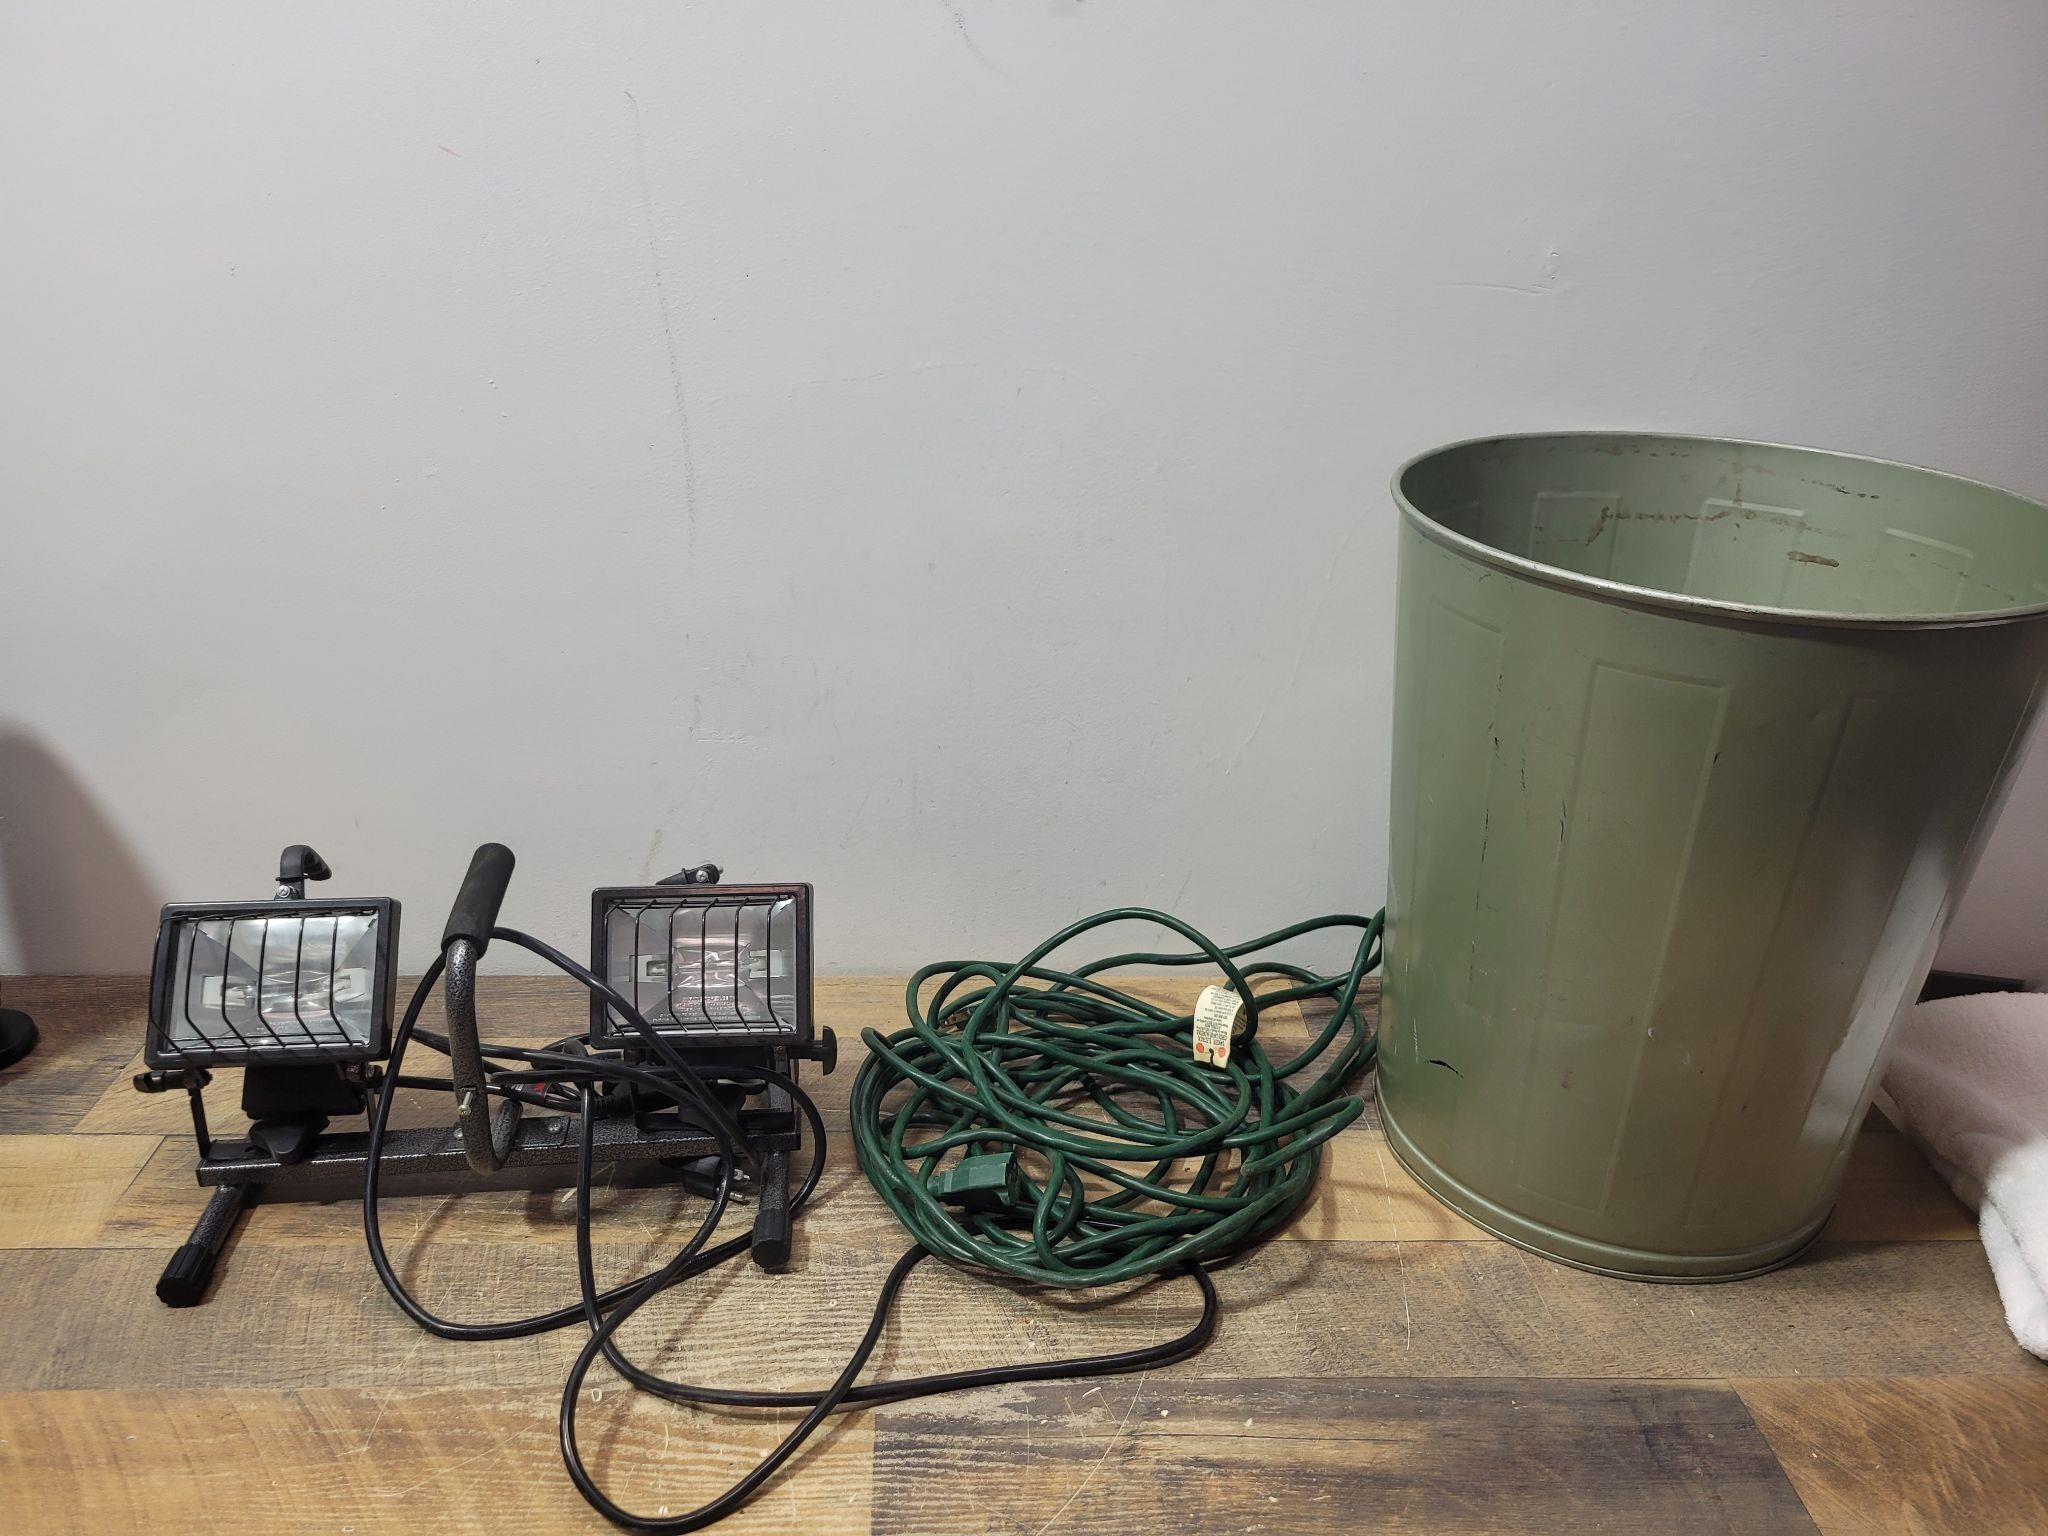 Halogen Lights, Cord & Garbage Can